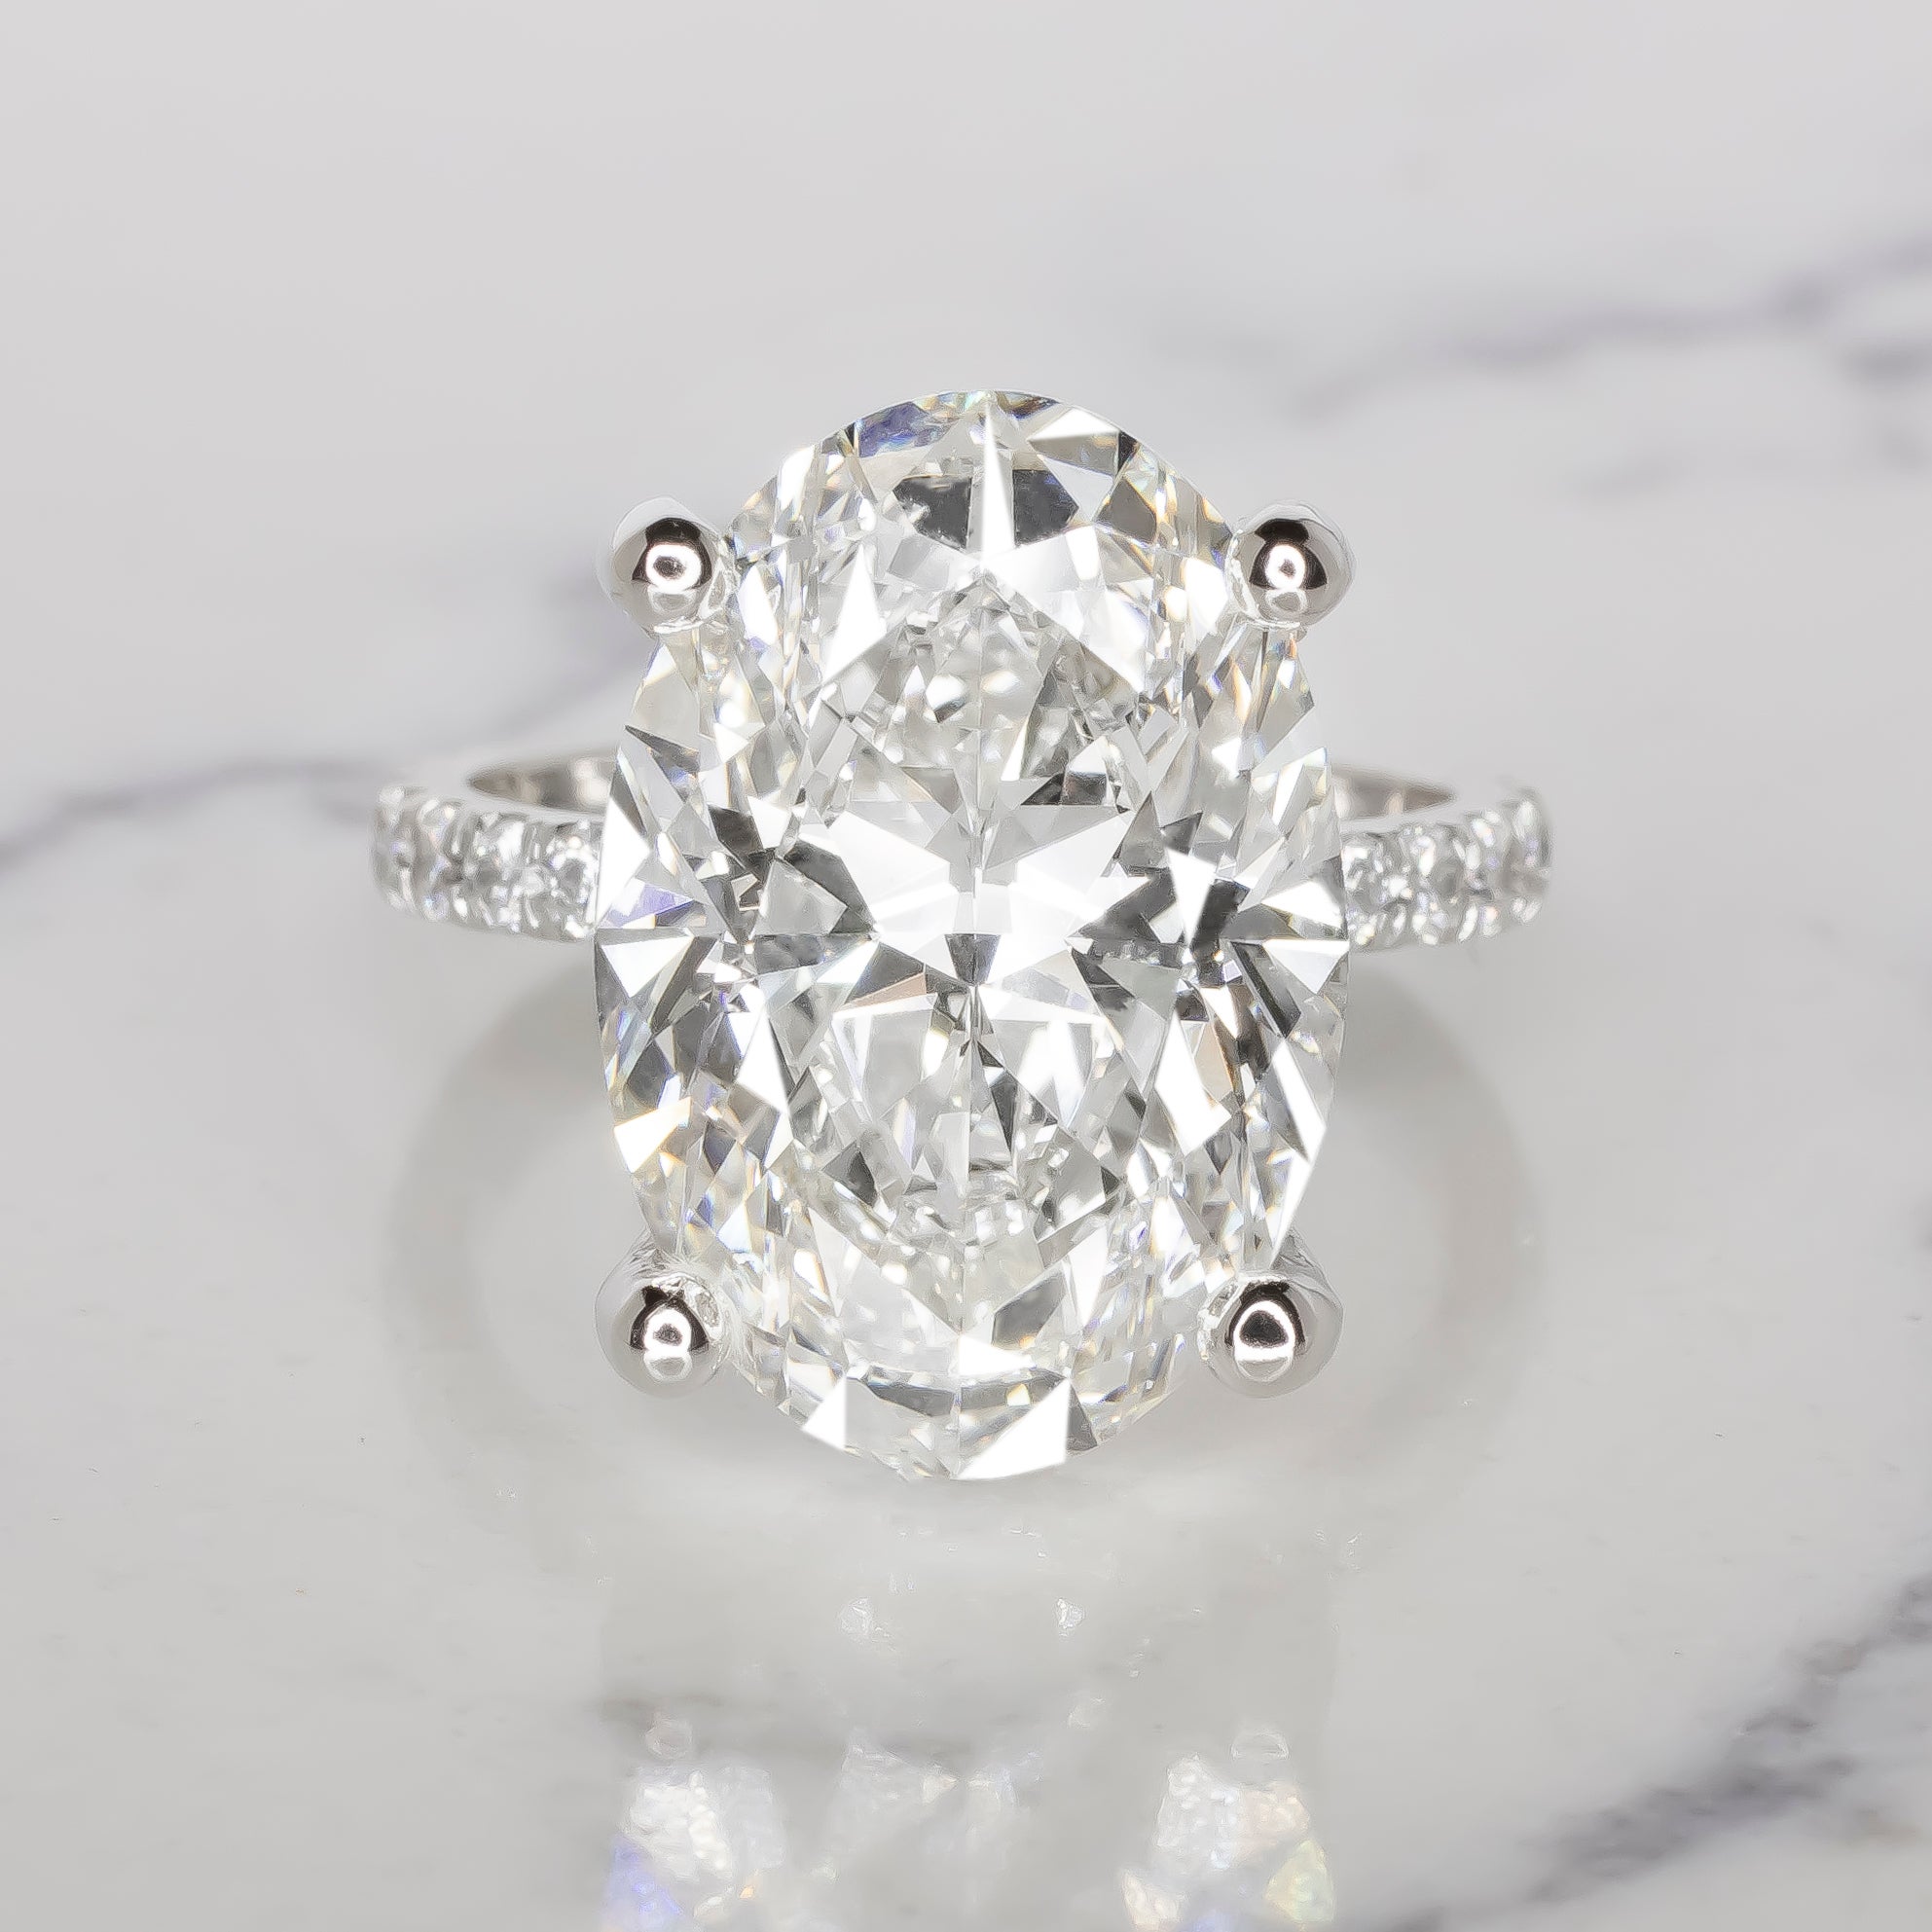 An investment grade and finely cut oval diamond ring is offered by Antinori di Sanpietro ROMA.
This 12 carat GIA Certified D Color Internally Flawless Clarity Oval cut diamond is set in a handcrafted Antinori di Sanpietro ROMA platinum ring. 

The